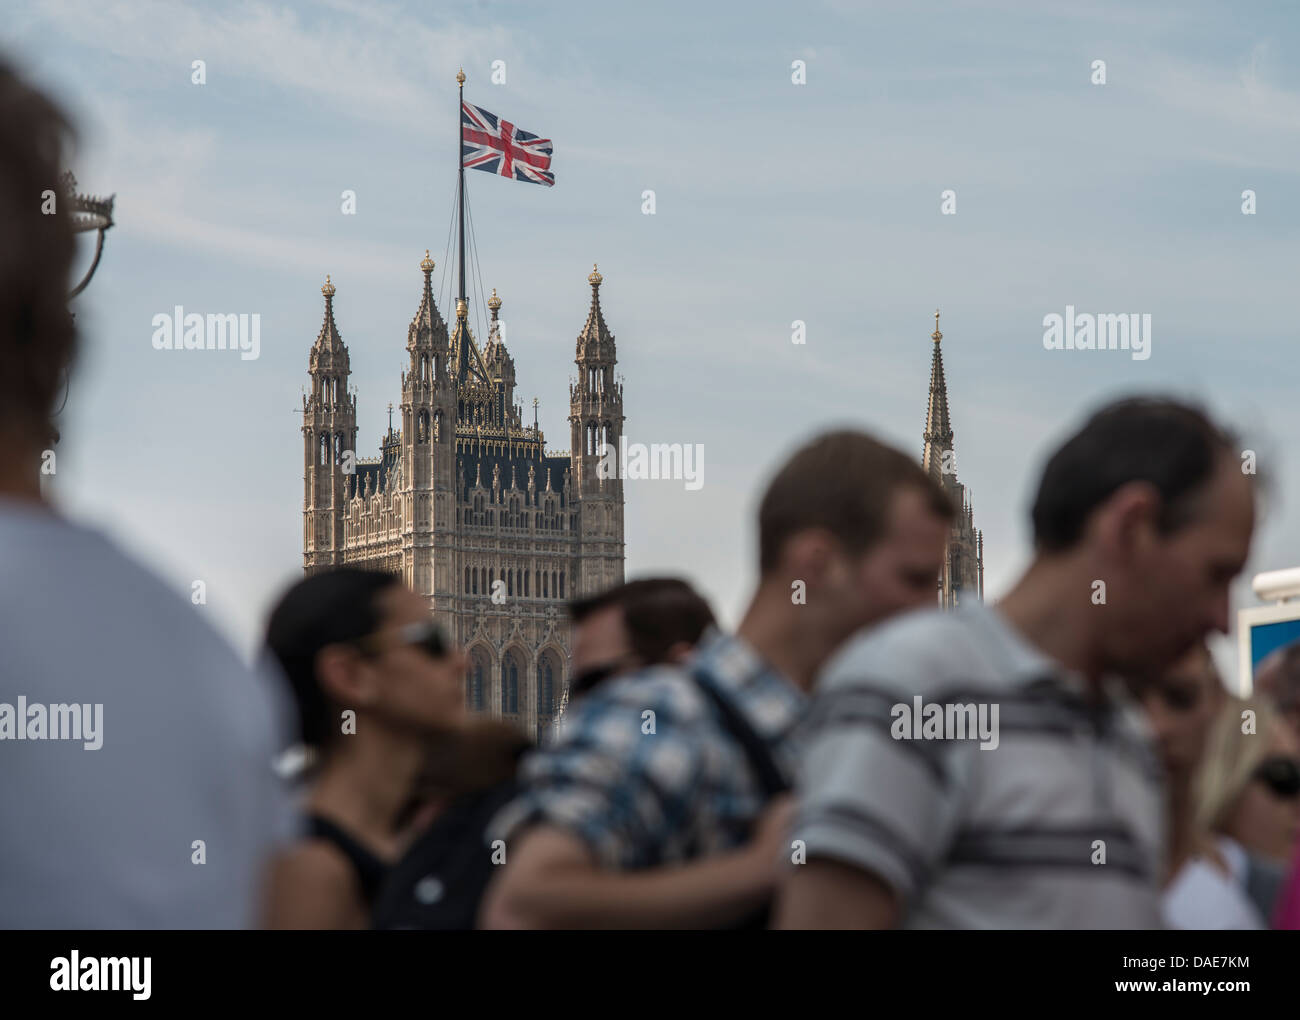 Olympic Games crowds walk along the Thames River in London as the Union Jack flies above The Victoria Tower on August 11, 2012. Stock Photo